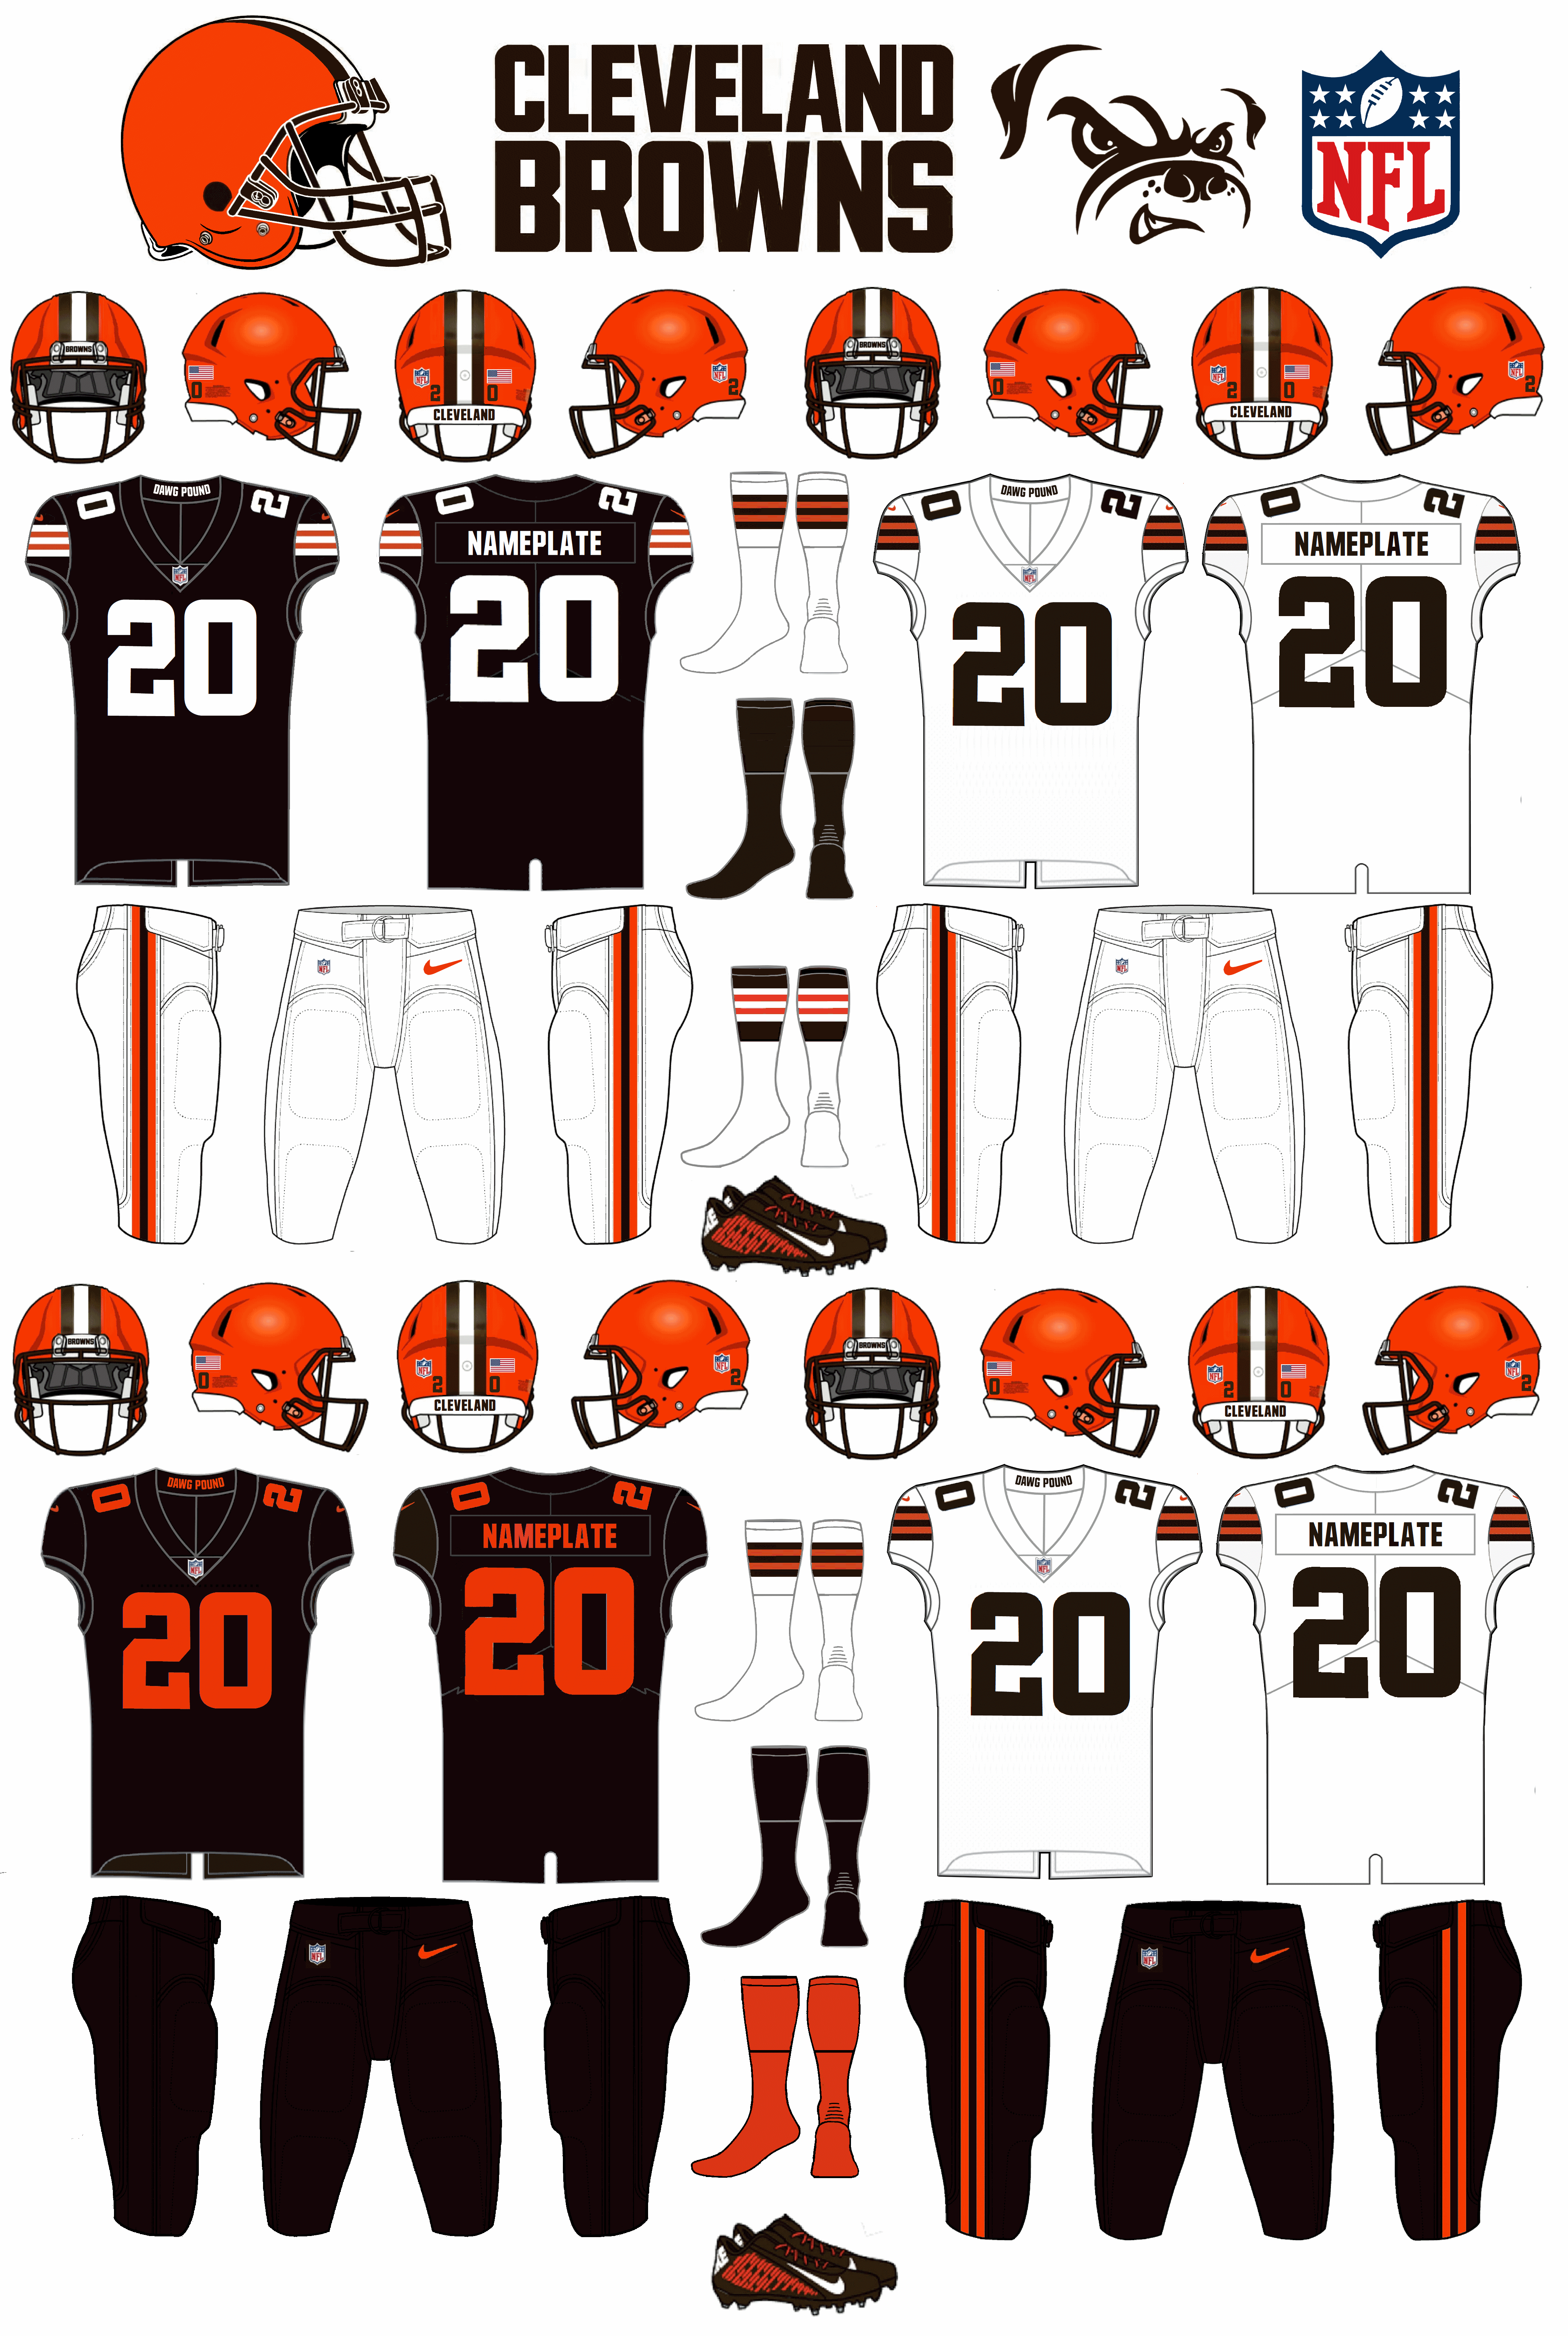 https://static.wikia.nocookie.net/collegefootballmania/images/d/d9/NFL-AFCN-2020_Cleveland_Browns_Jerseys.png/revision/latest?cb=20230703073319